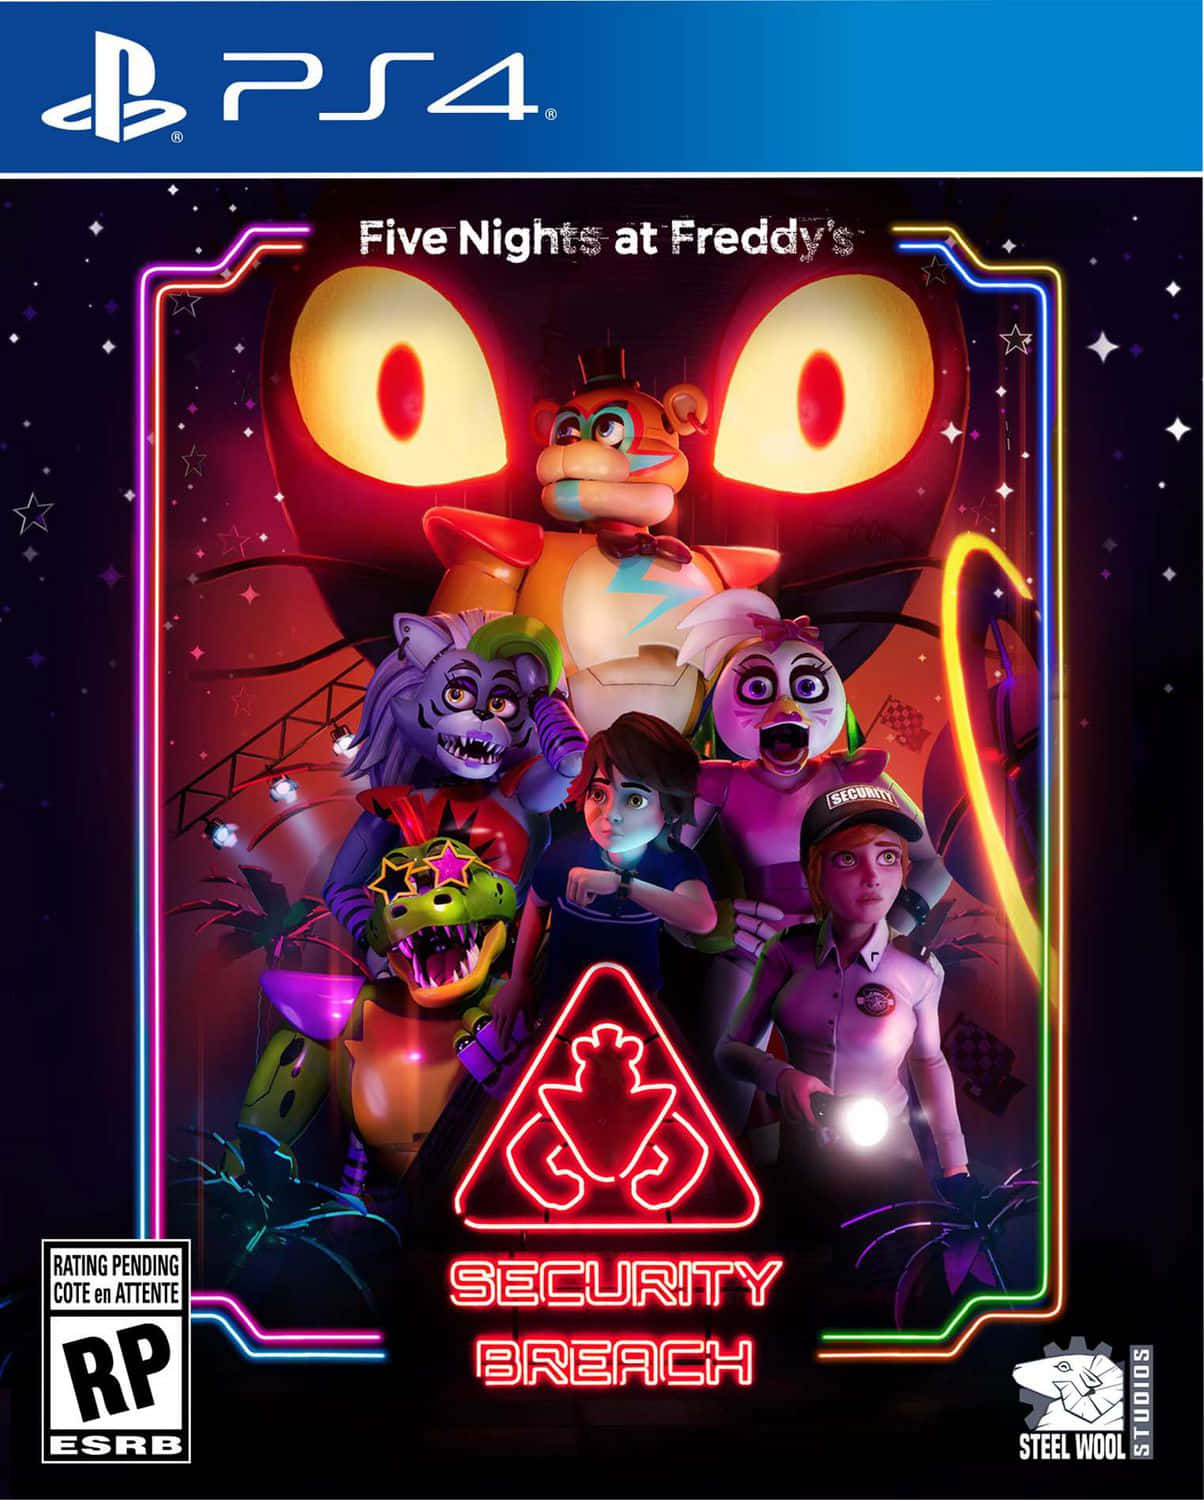 Einps4-cover Für Five Nights At Freddy's Security Search.